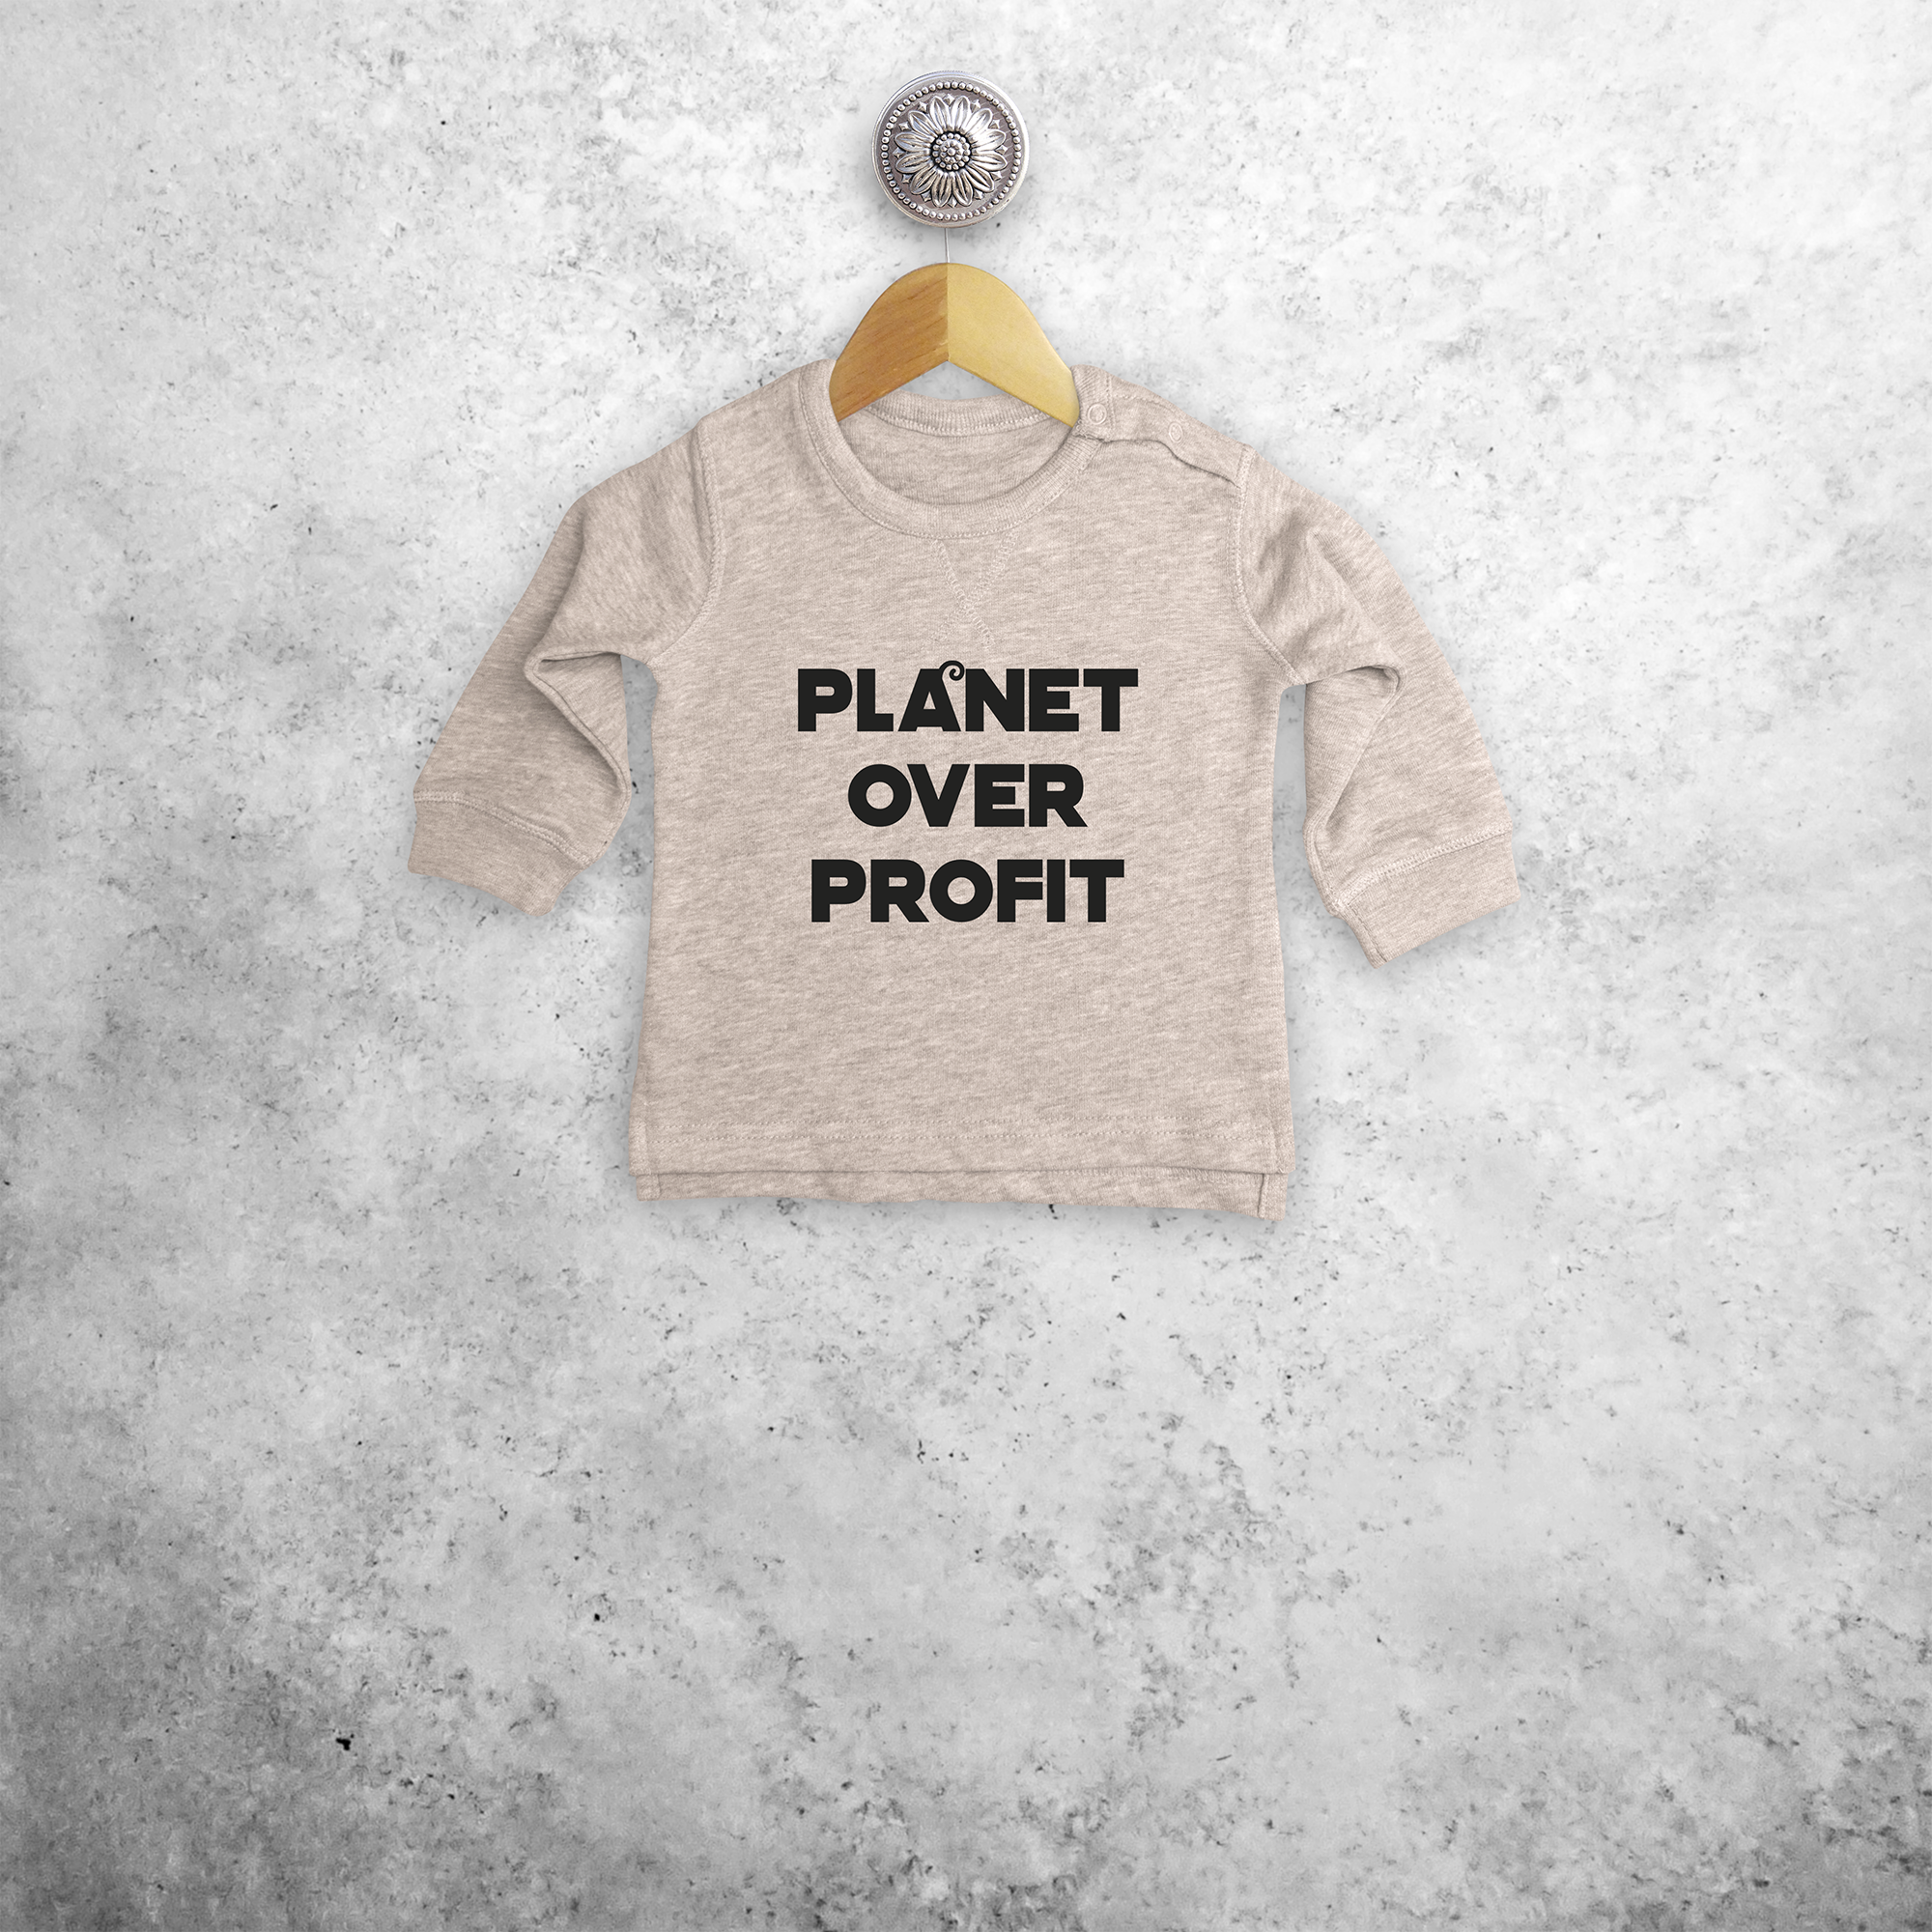 'Planet over profit' baby sweater